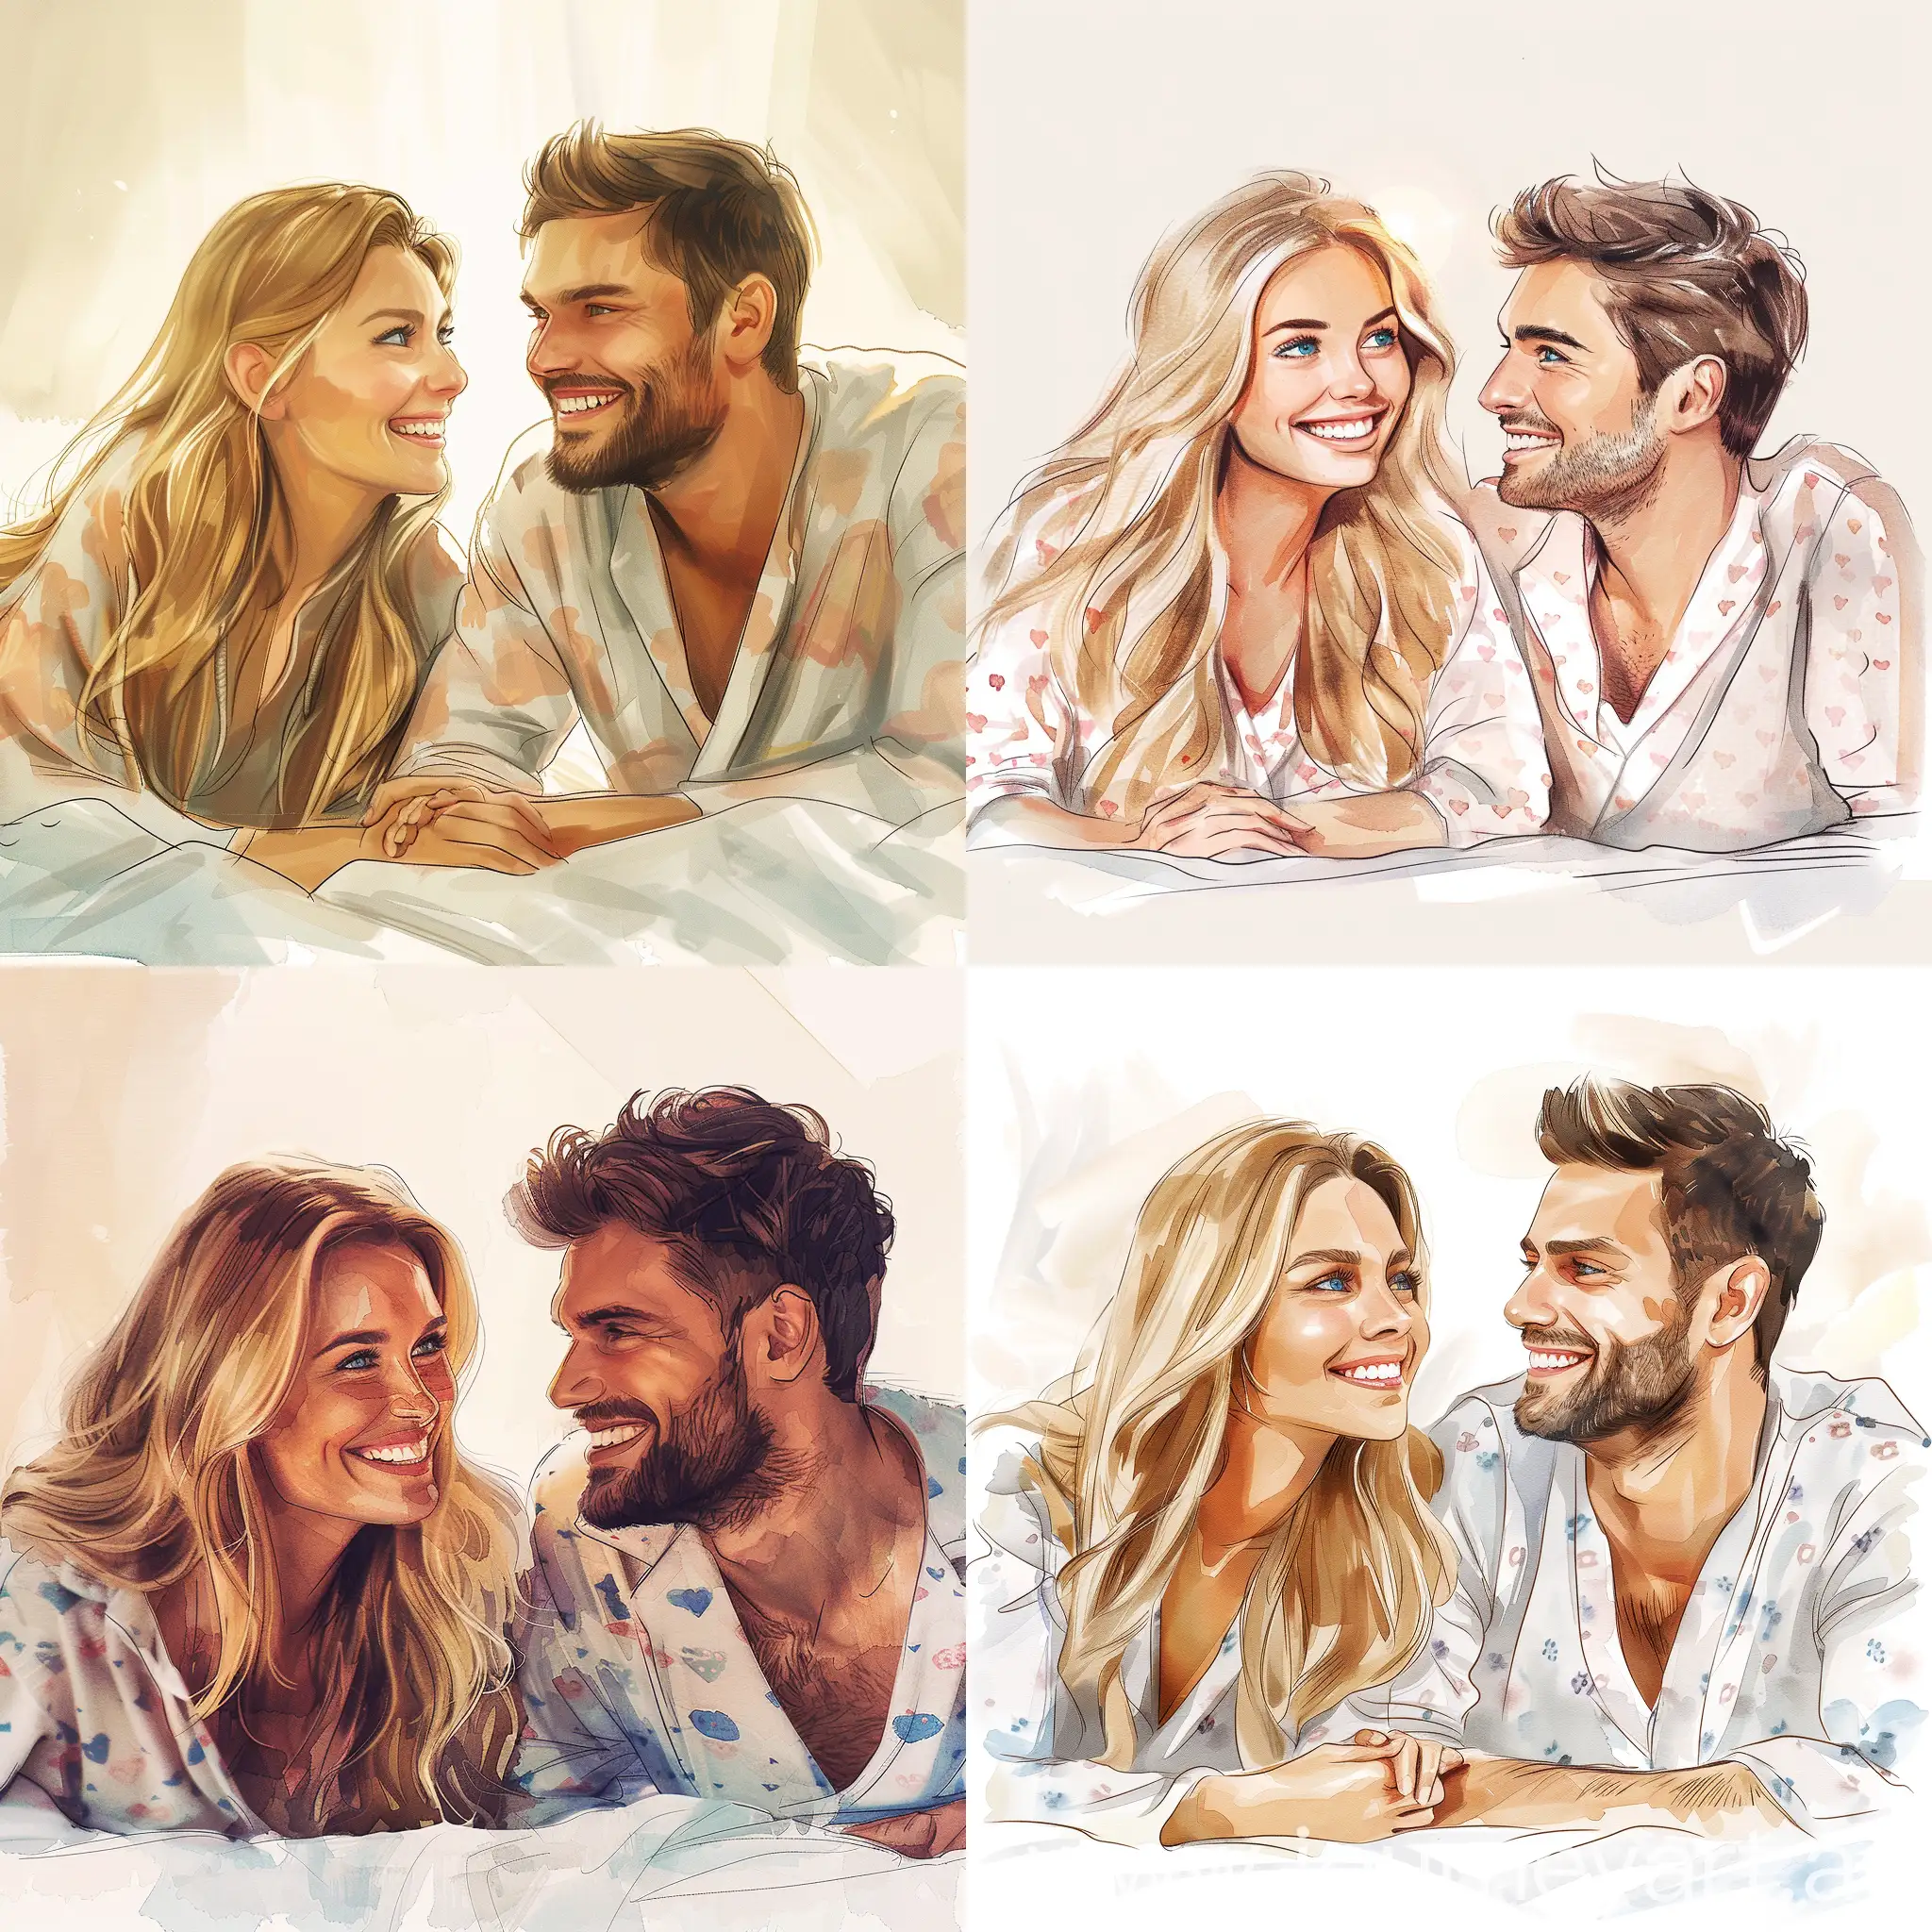 Smiling-Couple-in-Cozy-Pajamas-Sweet-Bedtime-Bliss-Illustration